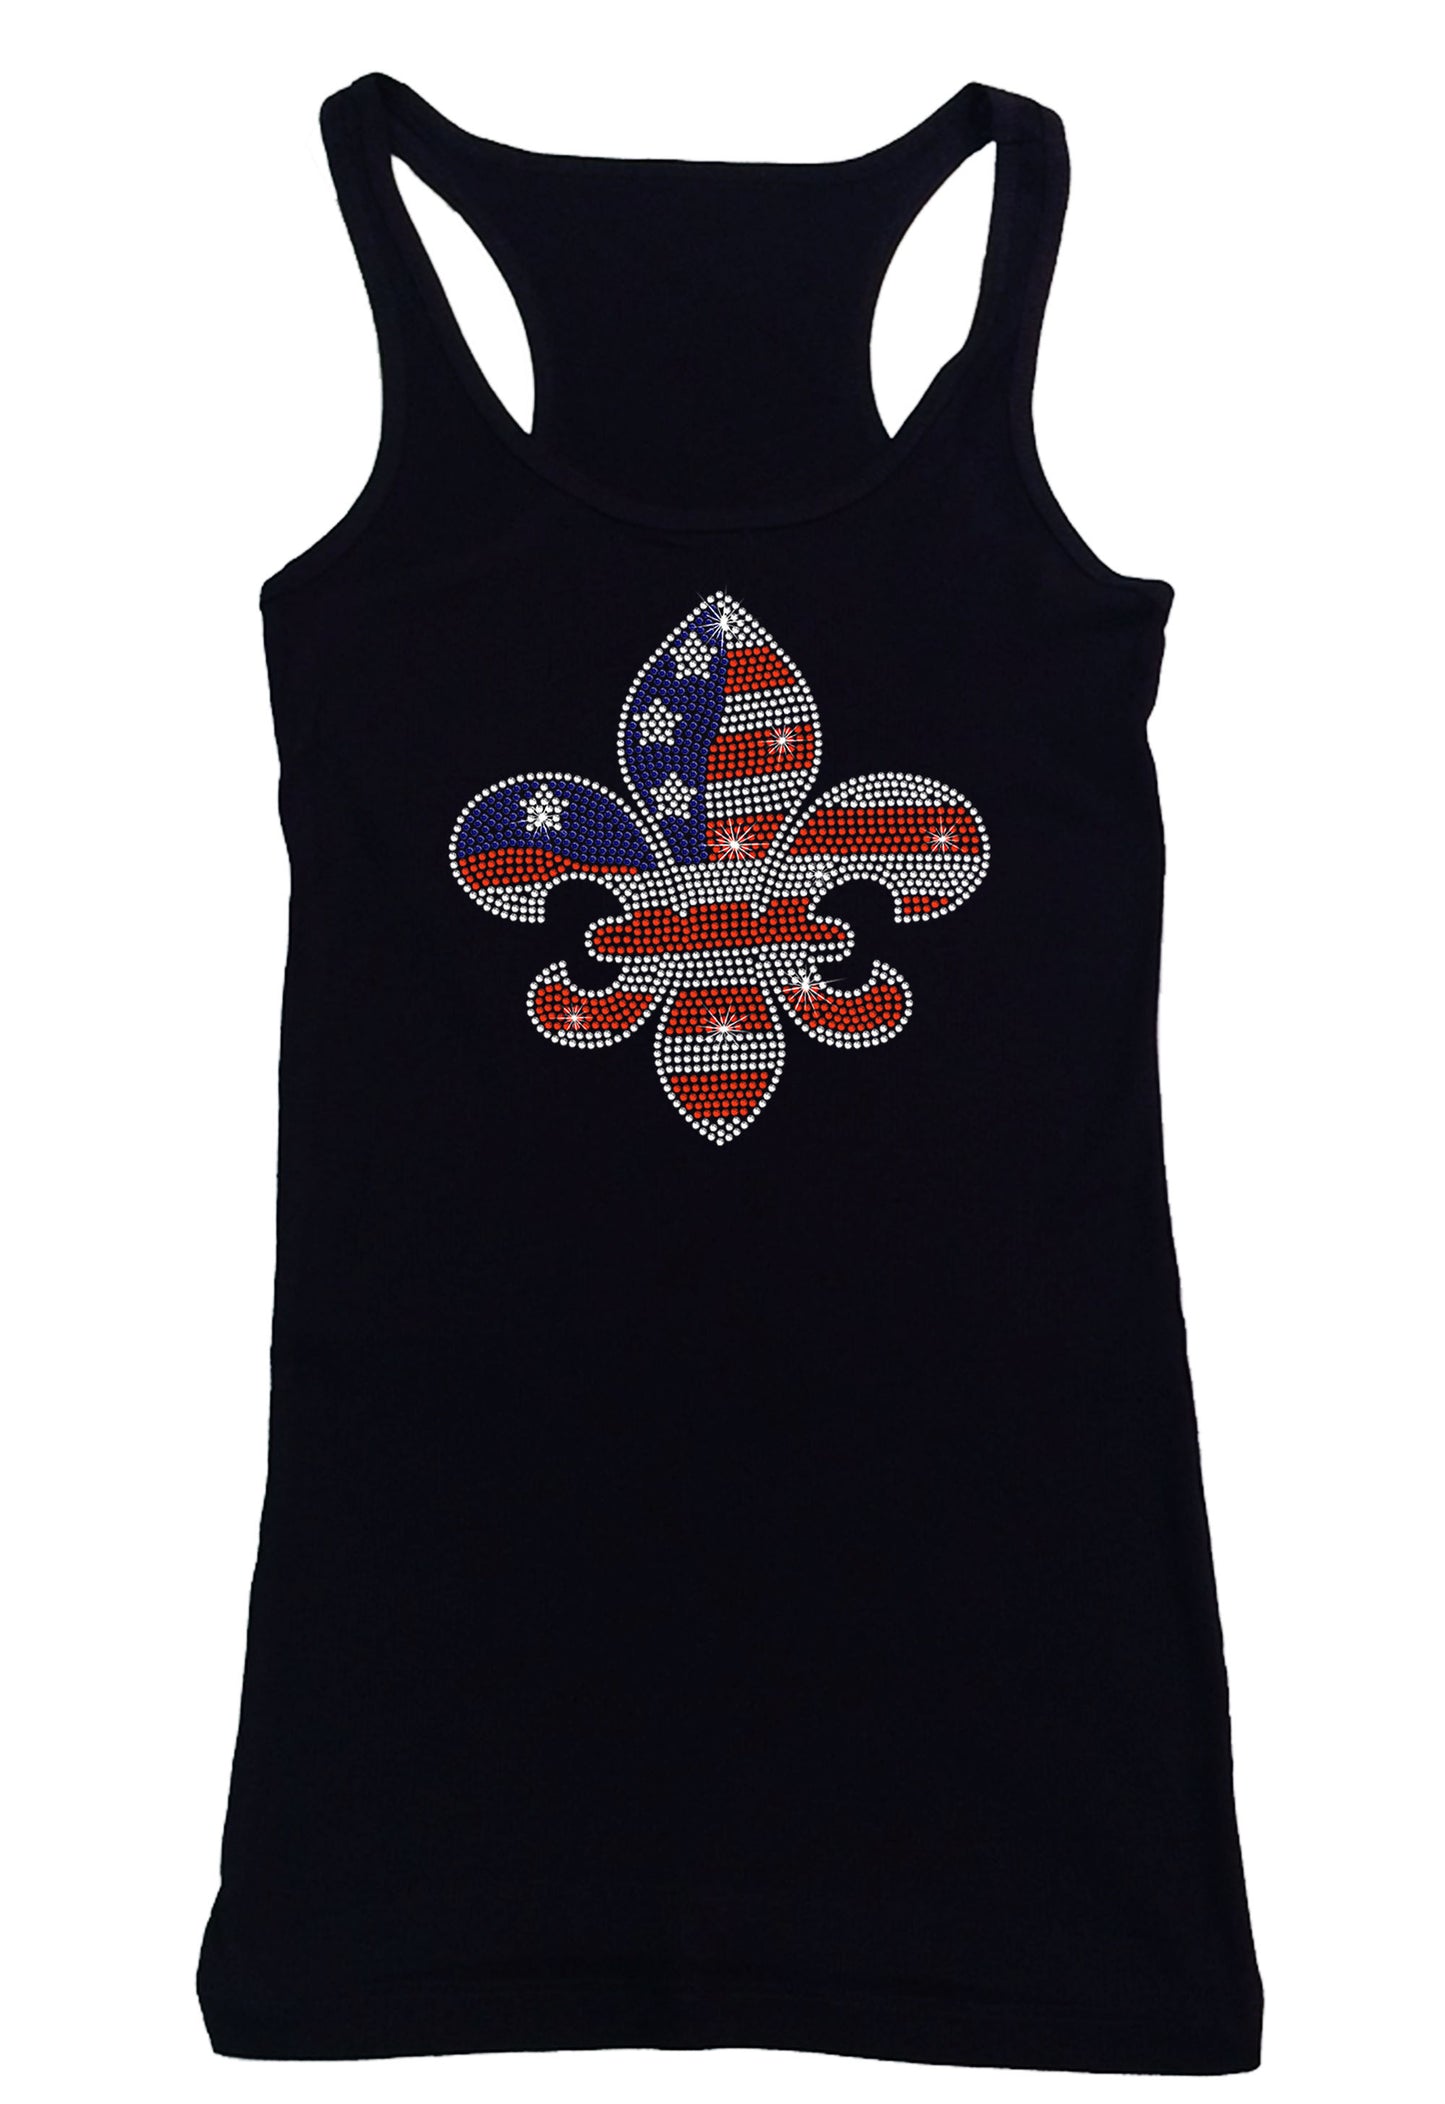 Women's Rhinestone Fitted Tight Snug 4th of July - Fleur de Lis in Red, White & Blue, Patriotic Shirt, 4th of July Shirt